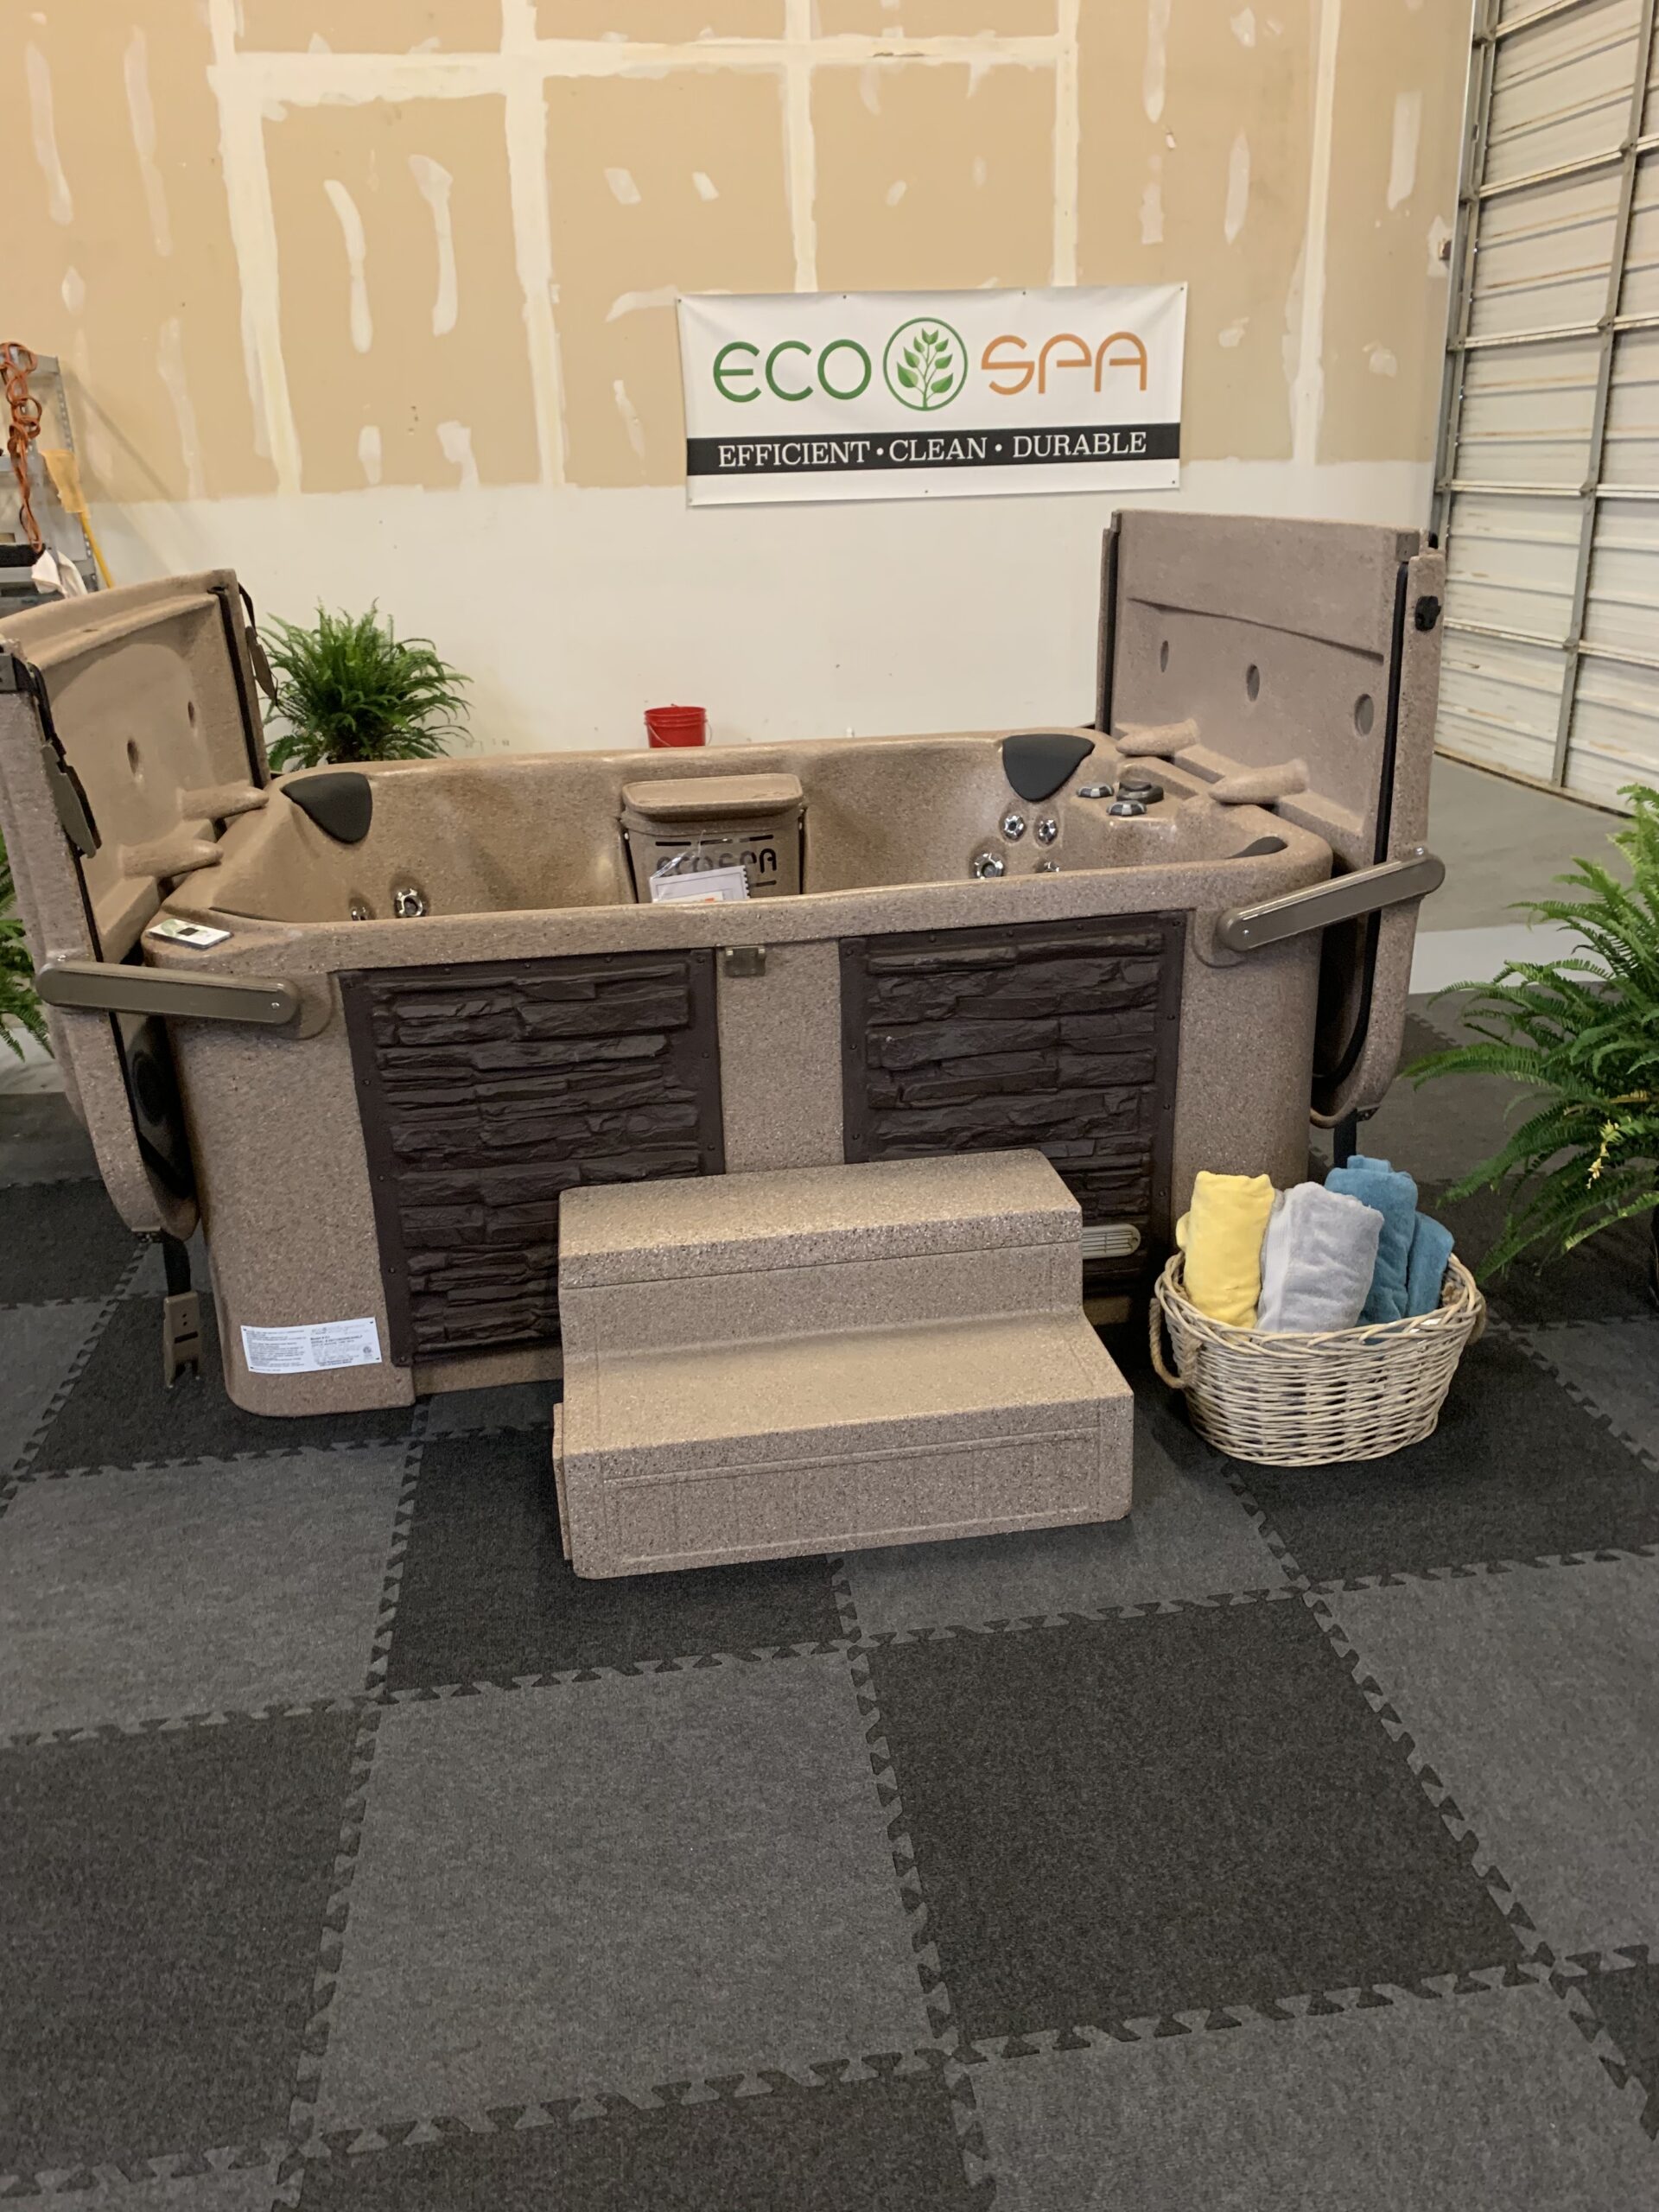 Southern Spa Outlet Show Display Riverchase Mall Galleria Home and Garden Show 2020